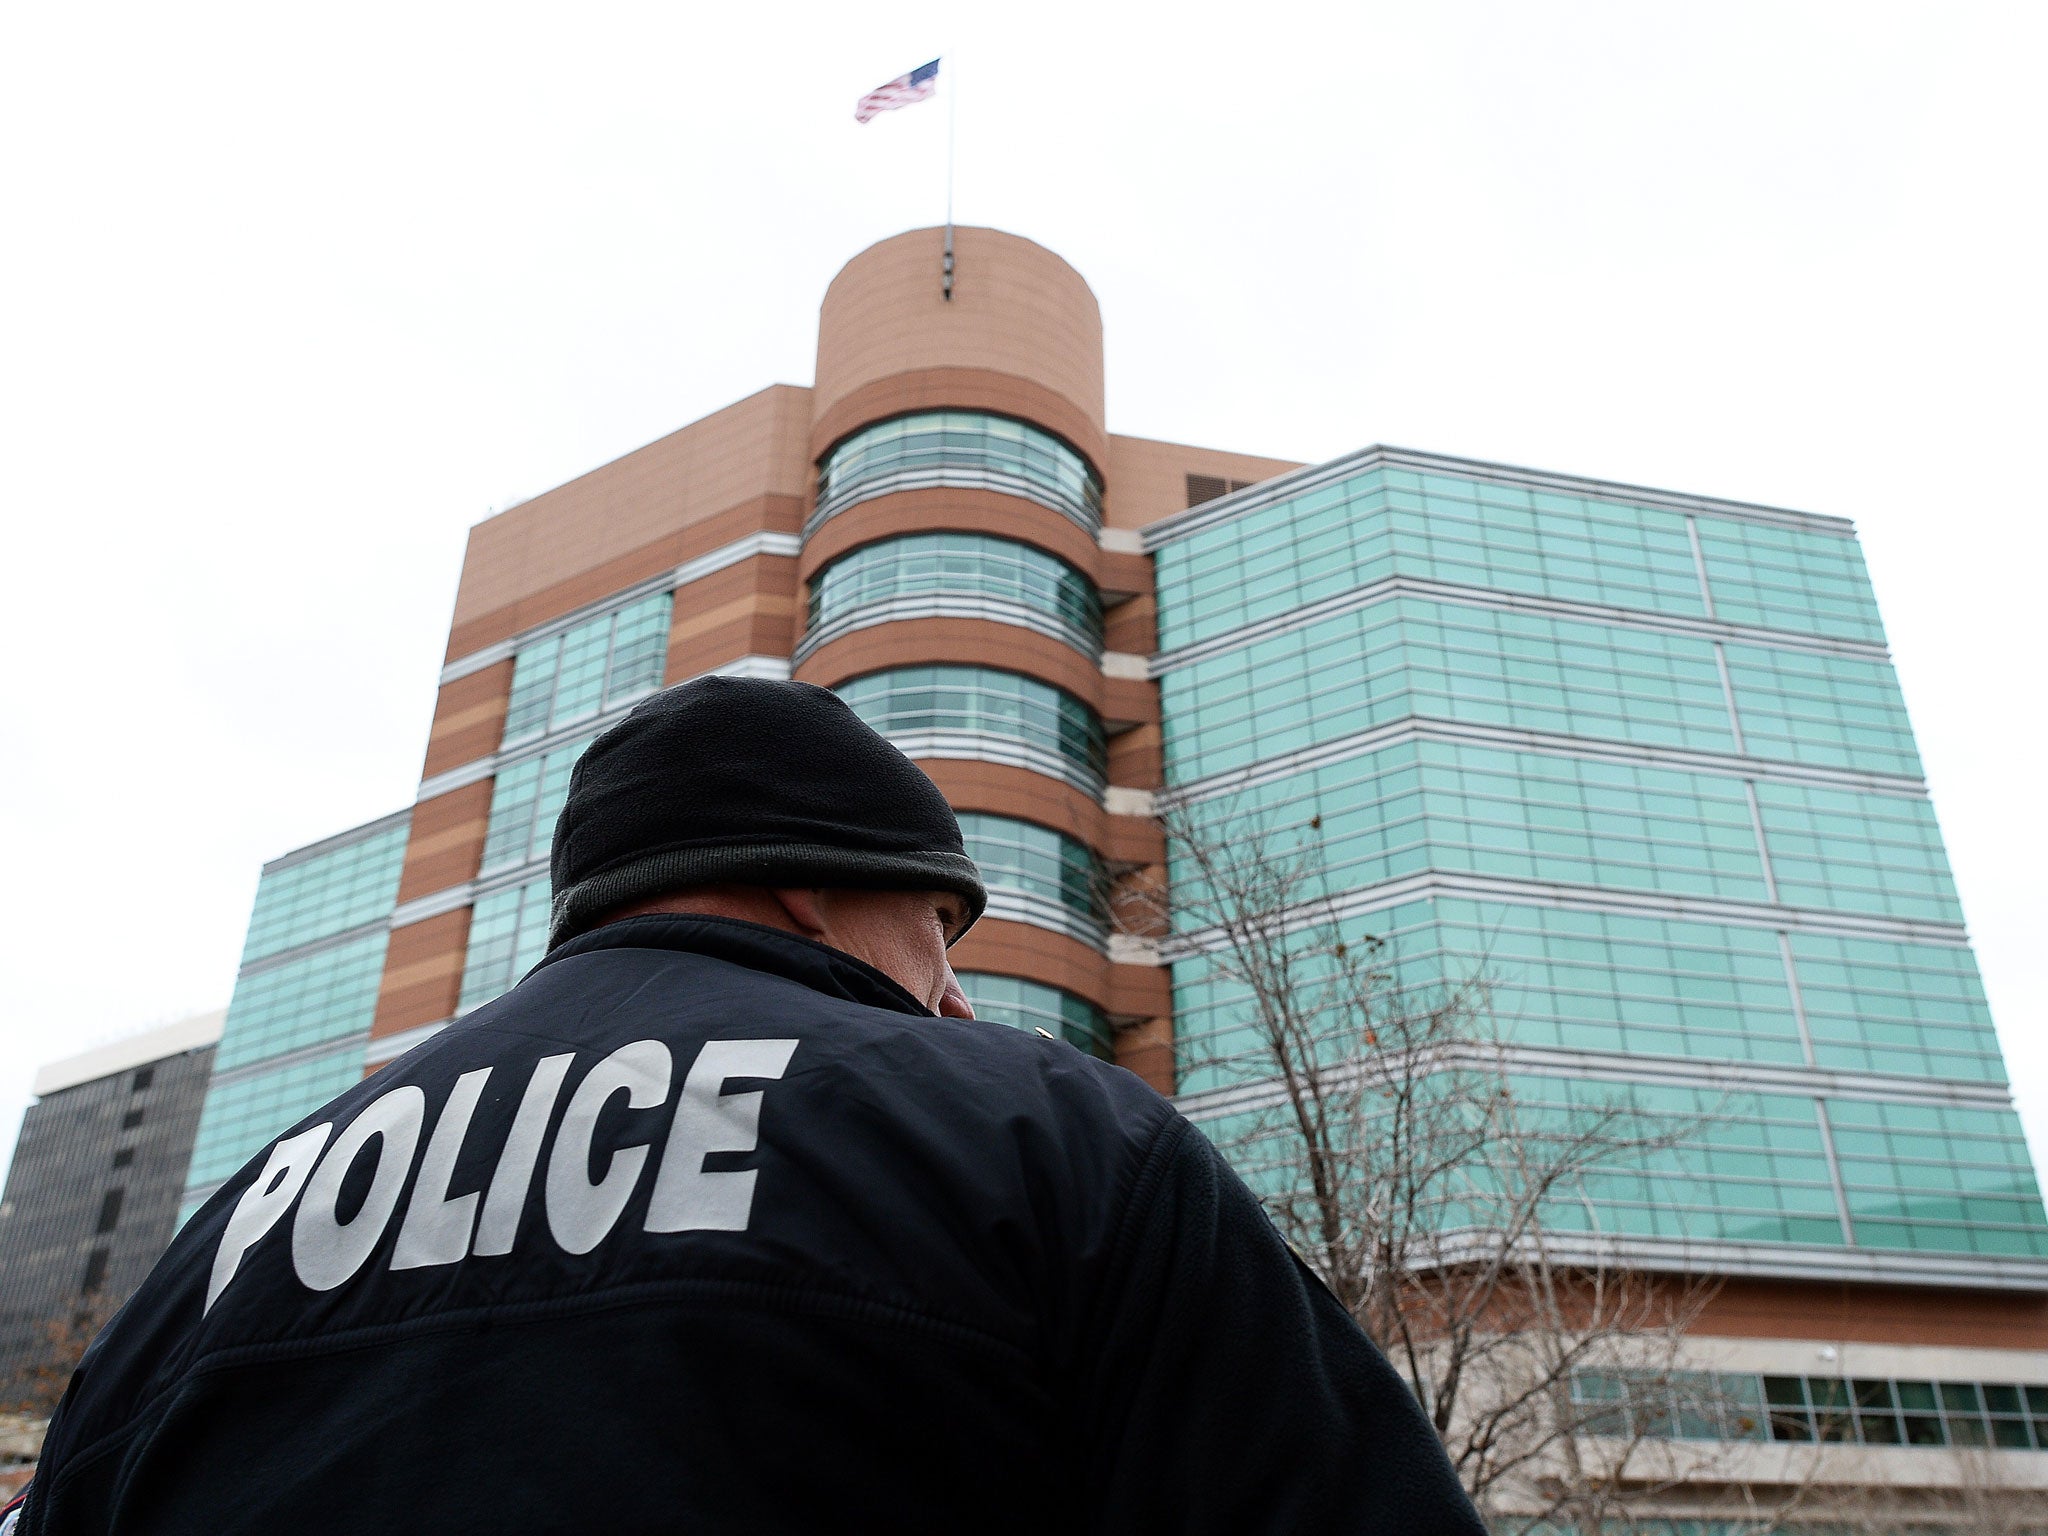 A police officer secures an area around the Buzz Westfall Justice Center in Clayton, Missouri where a grand jury is considering whether to indict a white Ferguson police officer who shot and killed an 18-year-old black teenager, Michael Brown.